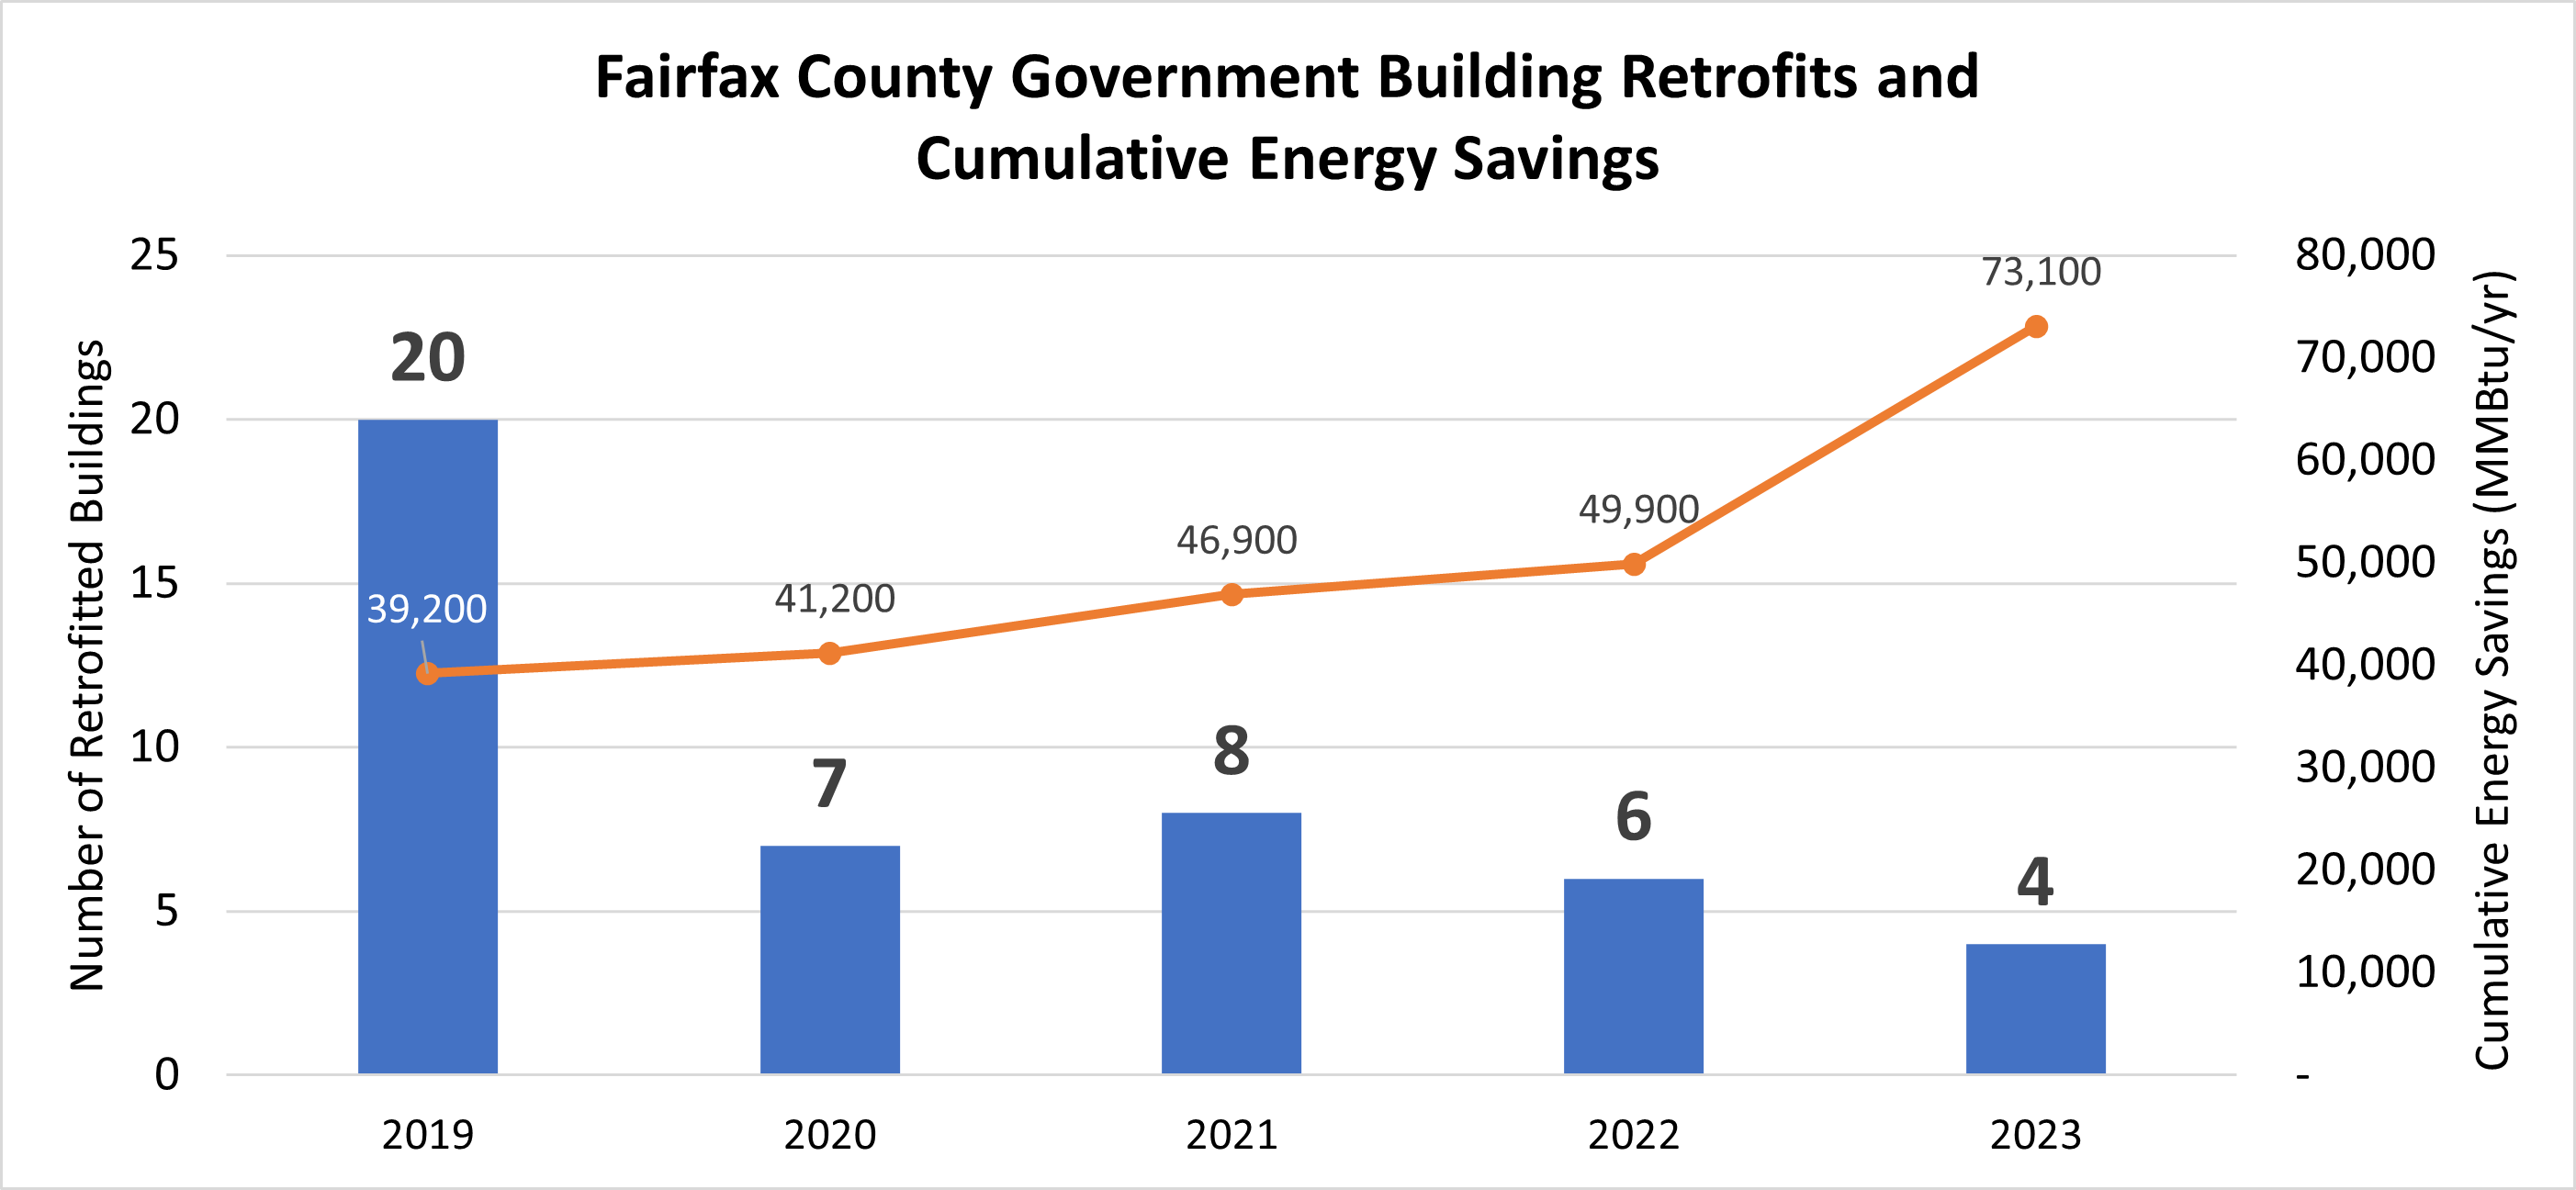 Fairfax County Government Building Retrofits and Cumulative Energy Savings from 2019 to 2023